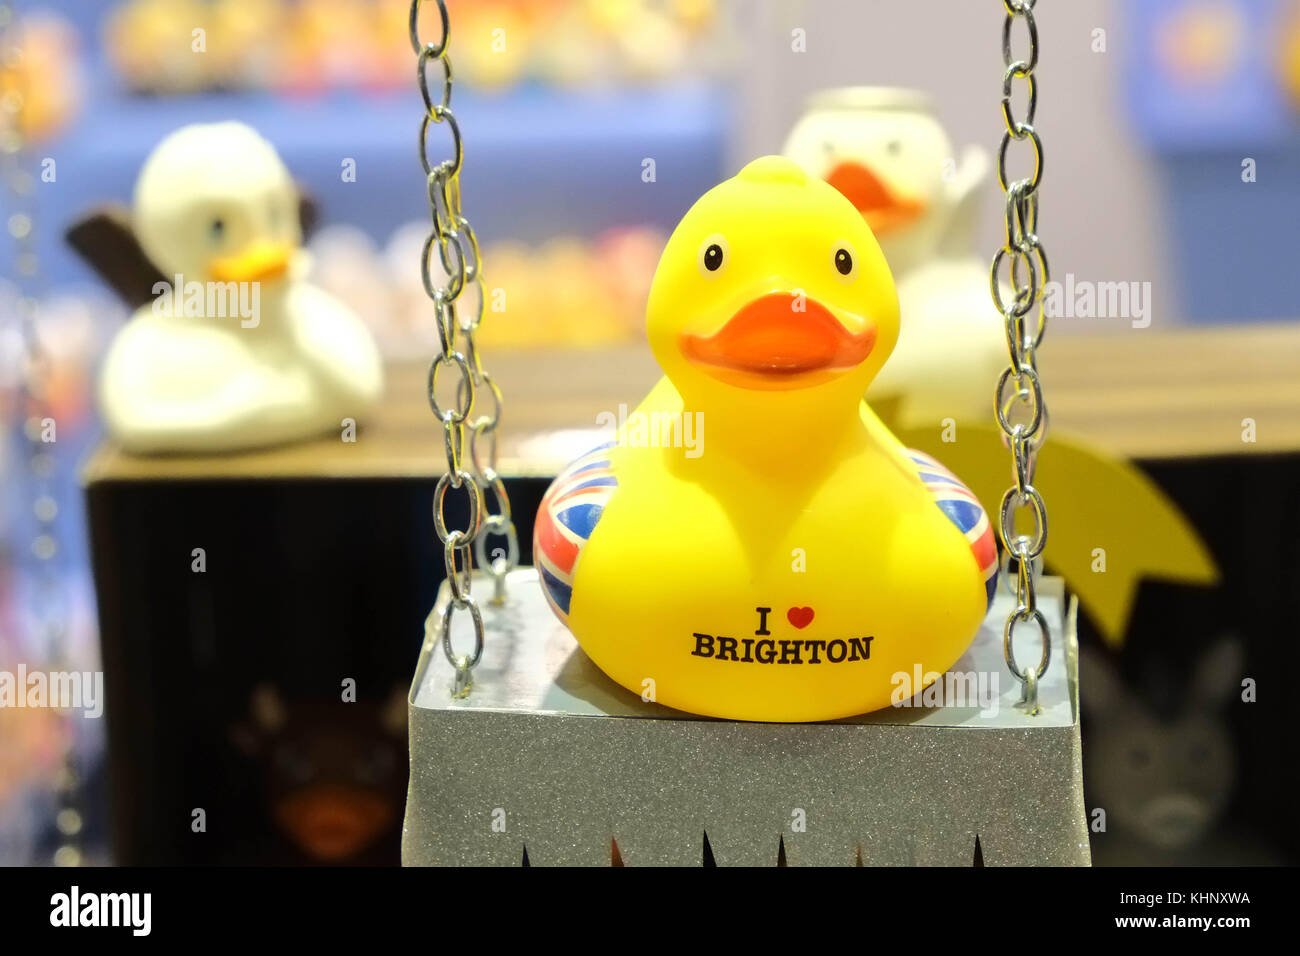 The Duck House in Meeting House Lane Brighton which only sells hundreds of different rubber ducks. Stock Photo